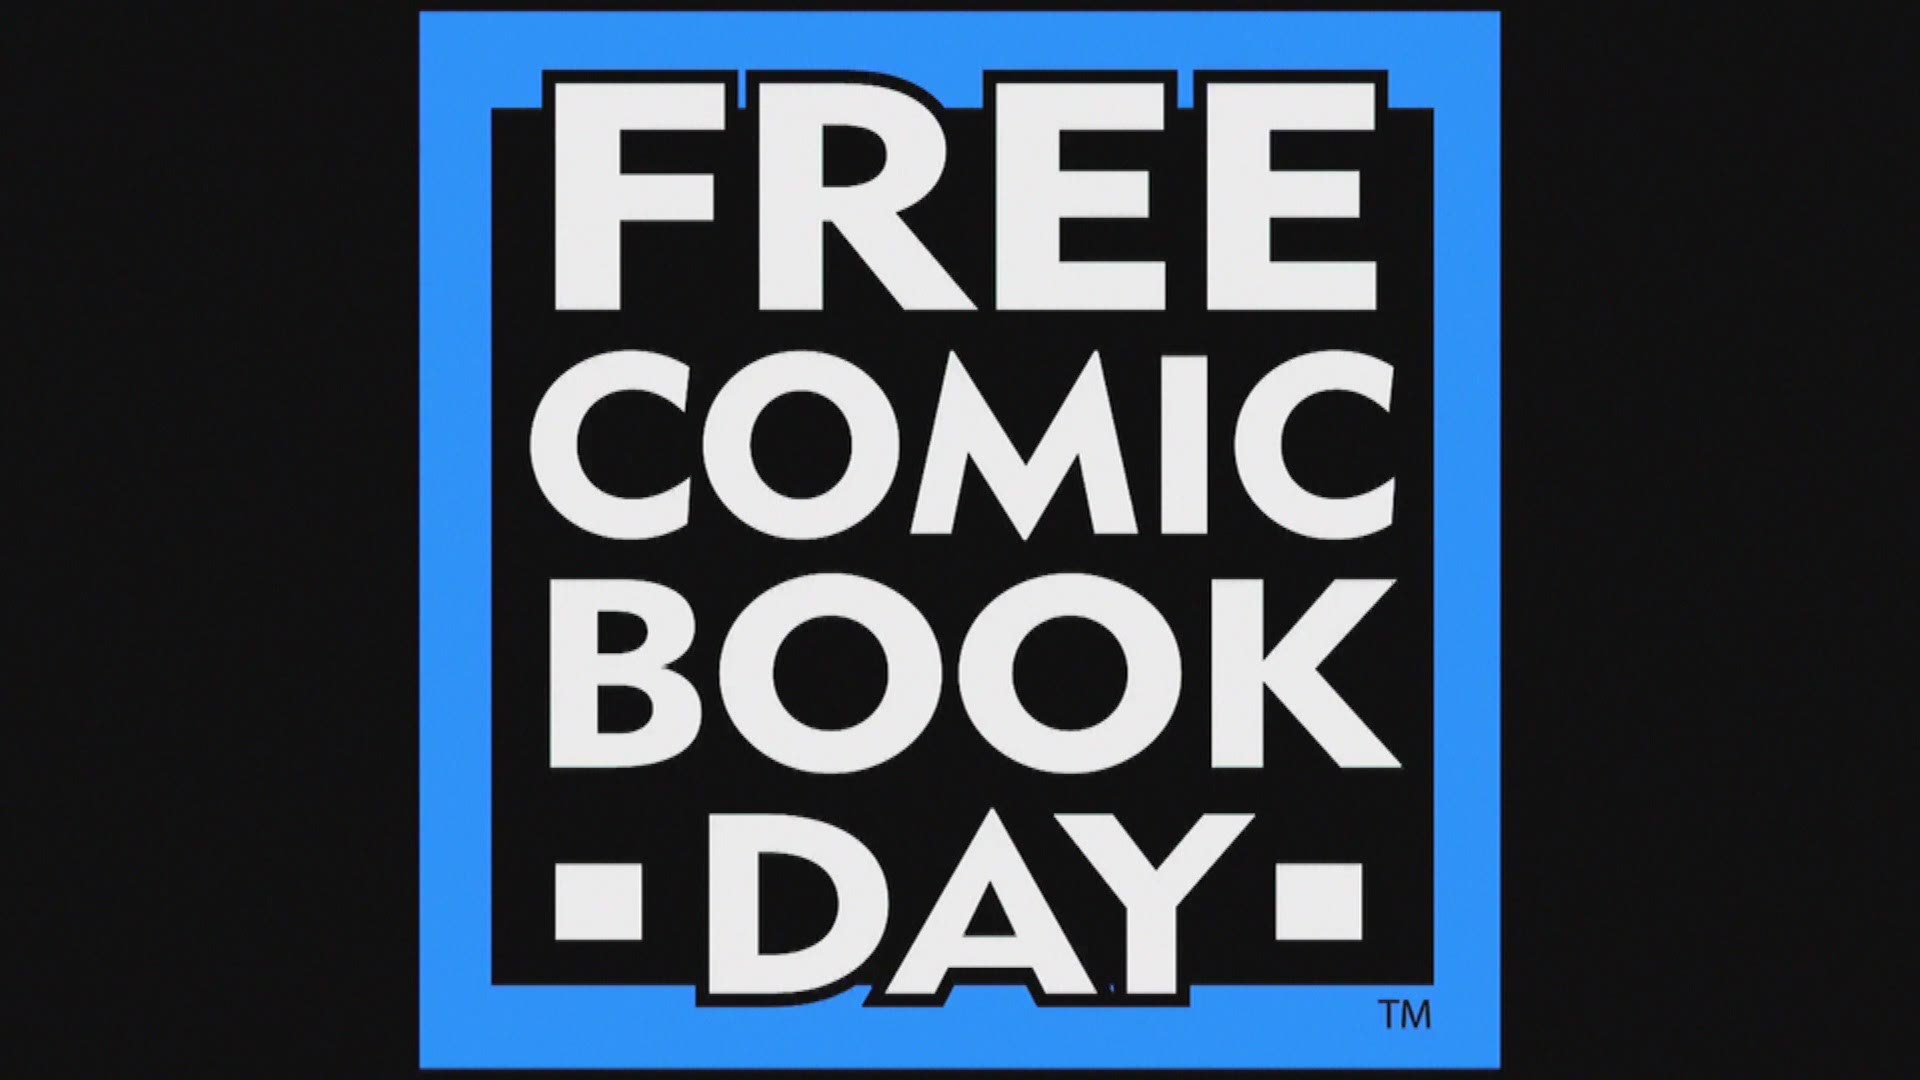 The man himself, Stan Lee promoting Free Comic Book Day.